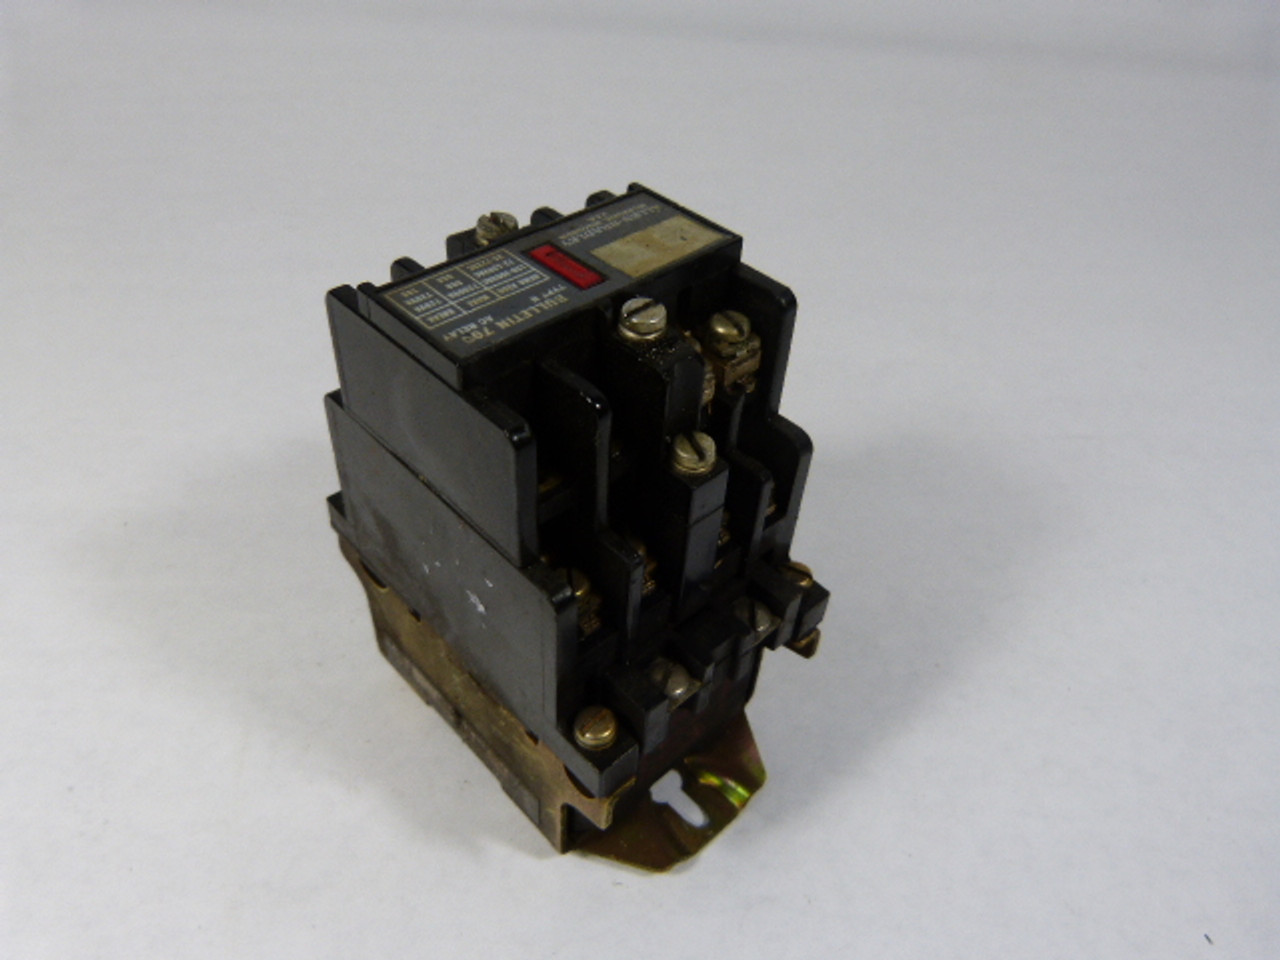 Allen-Bradley 700-NZ2240A1 Industrial Relay 10amp 120V Coil USED